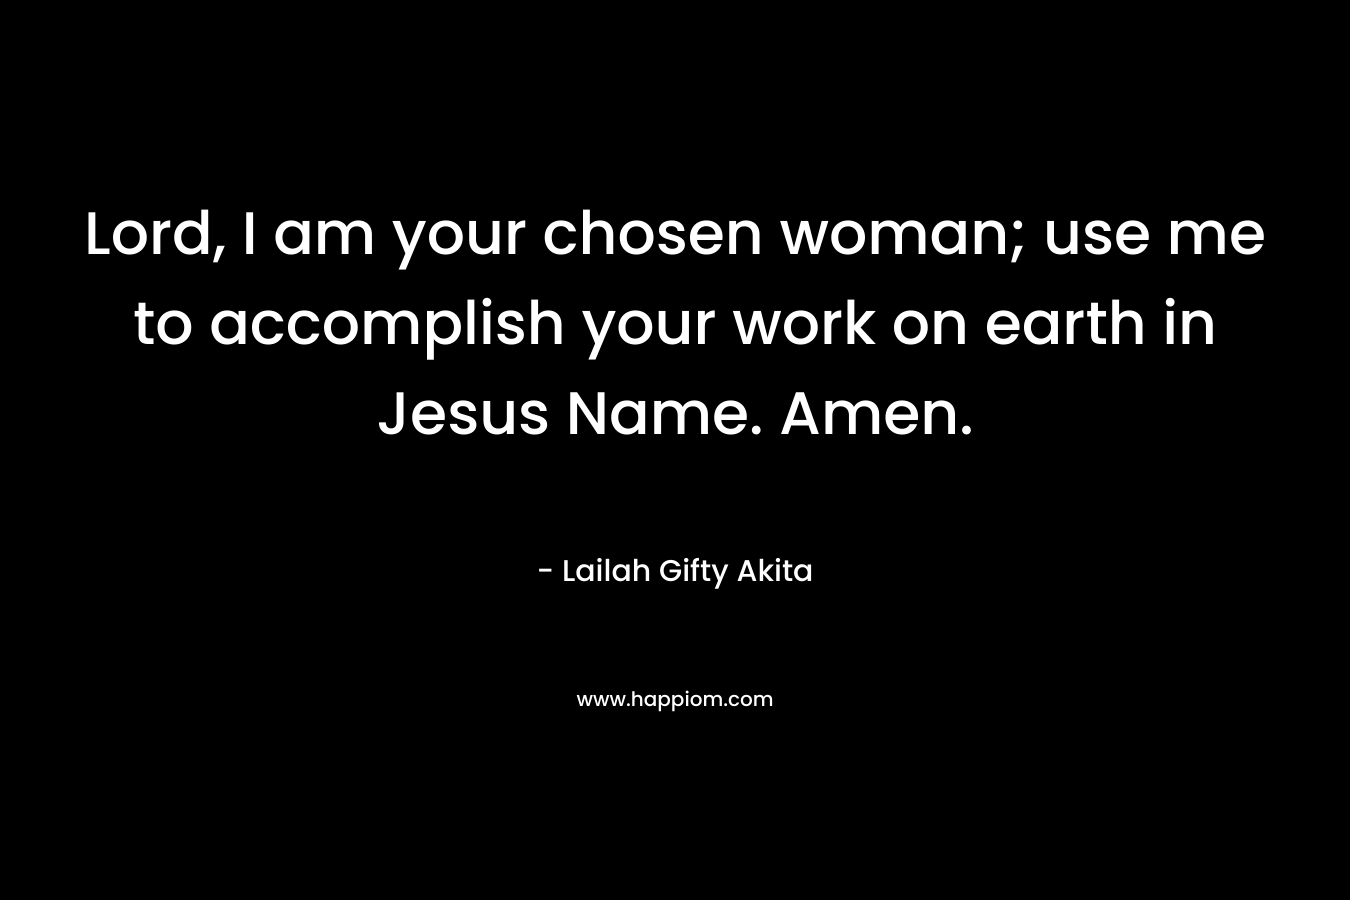 Lord, I am your chosen woman; use me to accomplish your work on earth in Jesus Name. Amen.